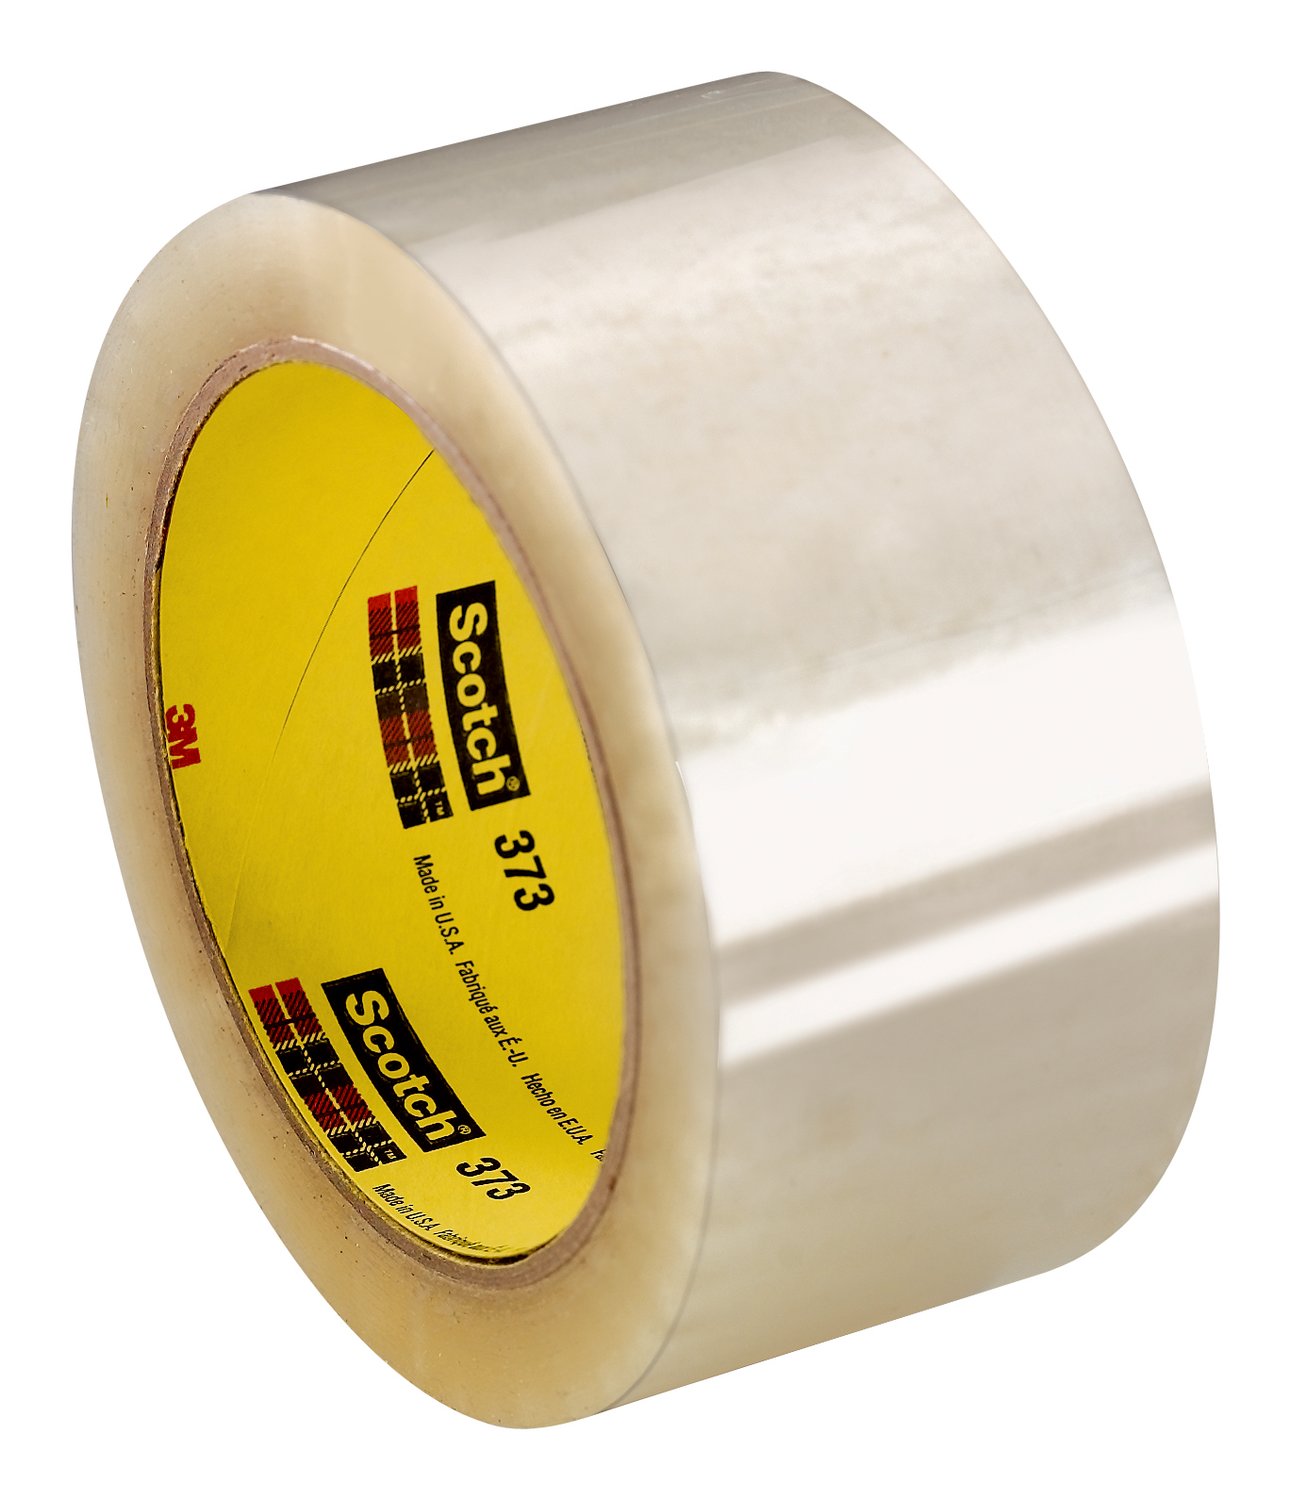 2 Heavy-Duty 2.7mil Clear Shipping Packing Moving Tape 120 yards/360' ea